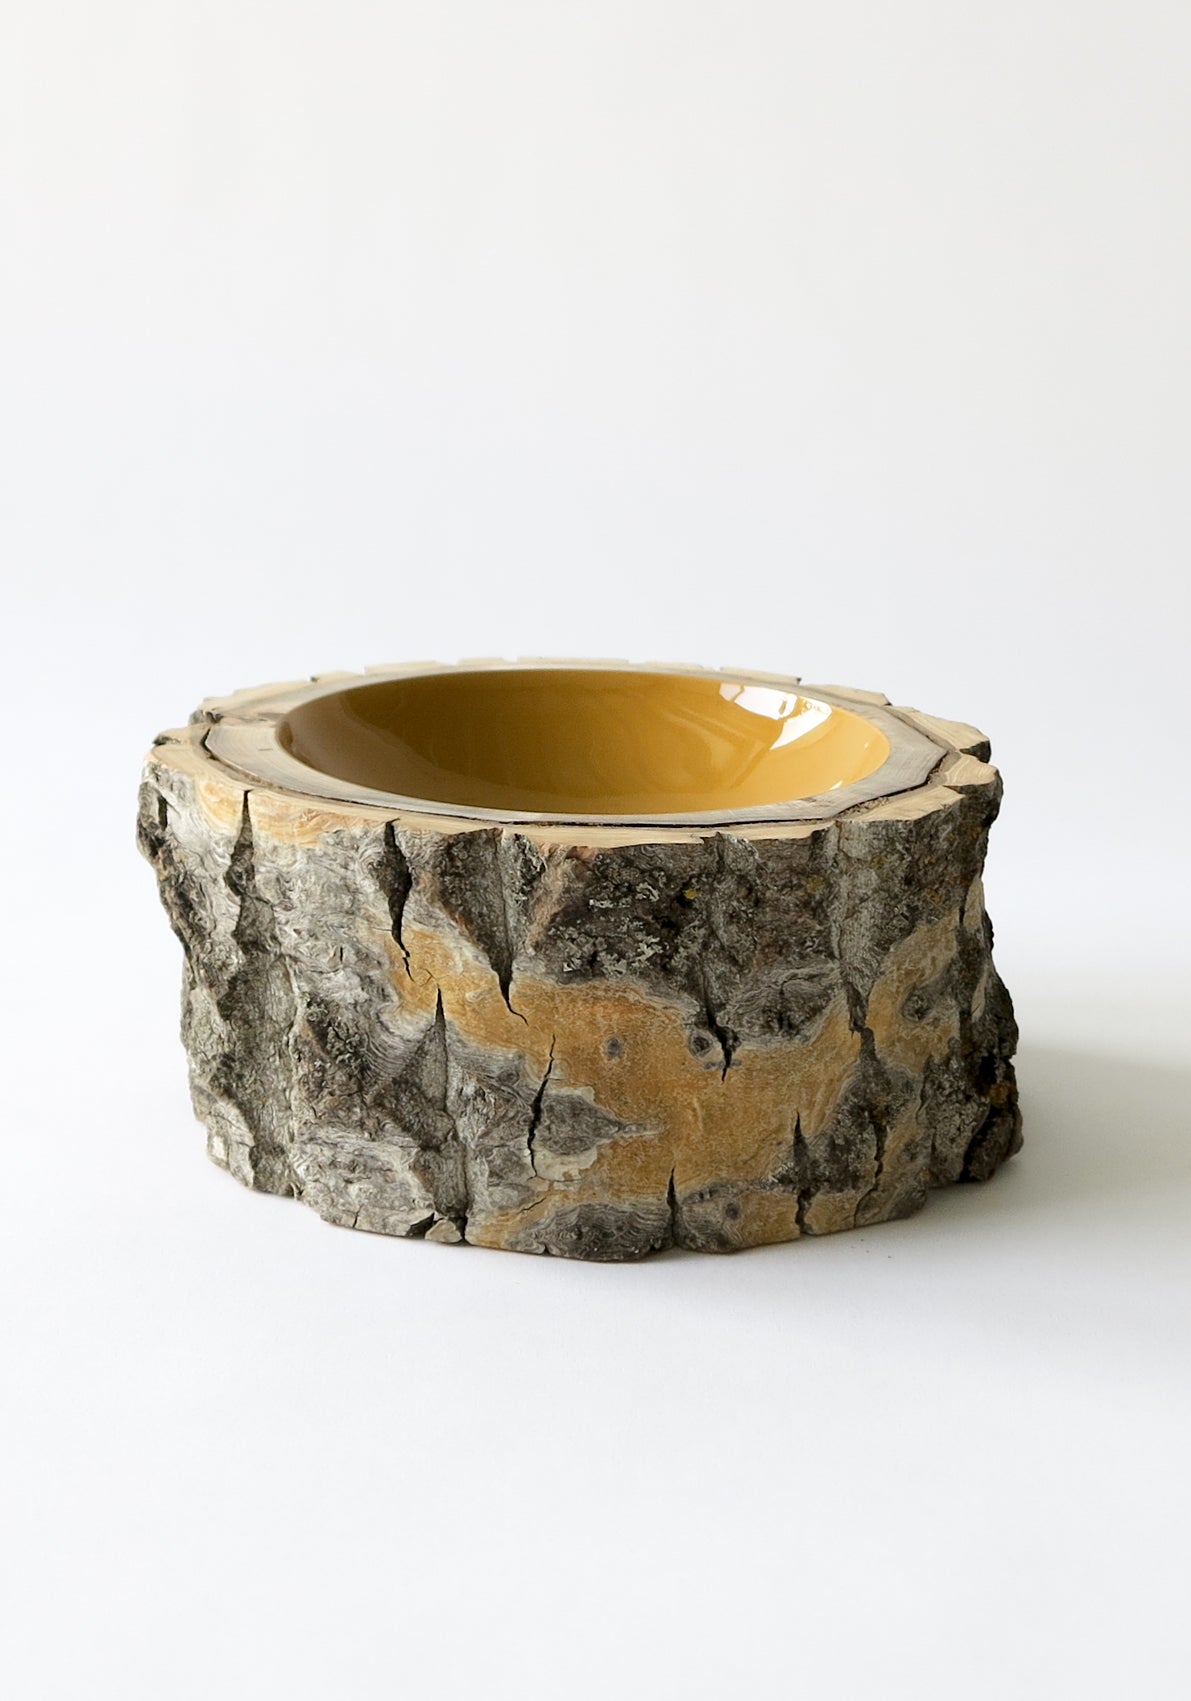 Size 9 Log Bowl - Large wooden bowl with chunky smooth poplar bark, glossy interior is a yellow ochre colour.